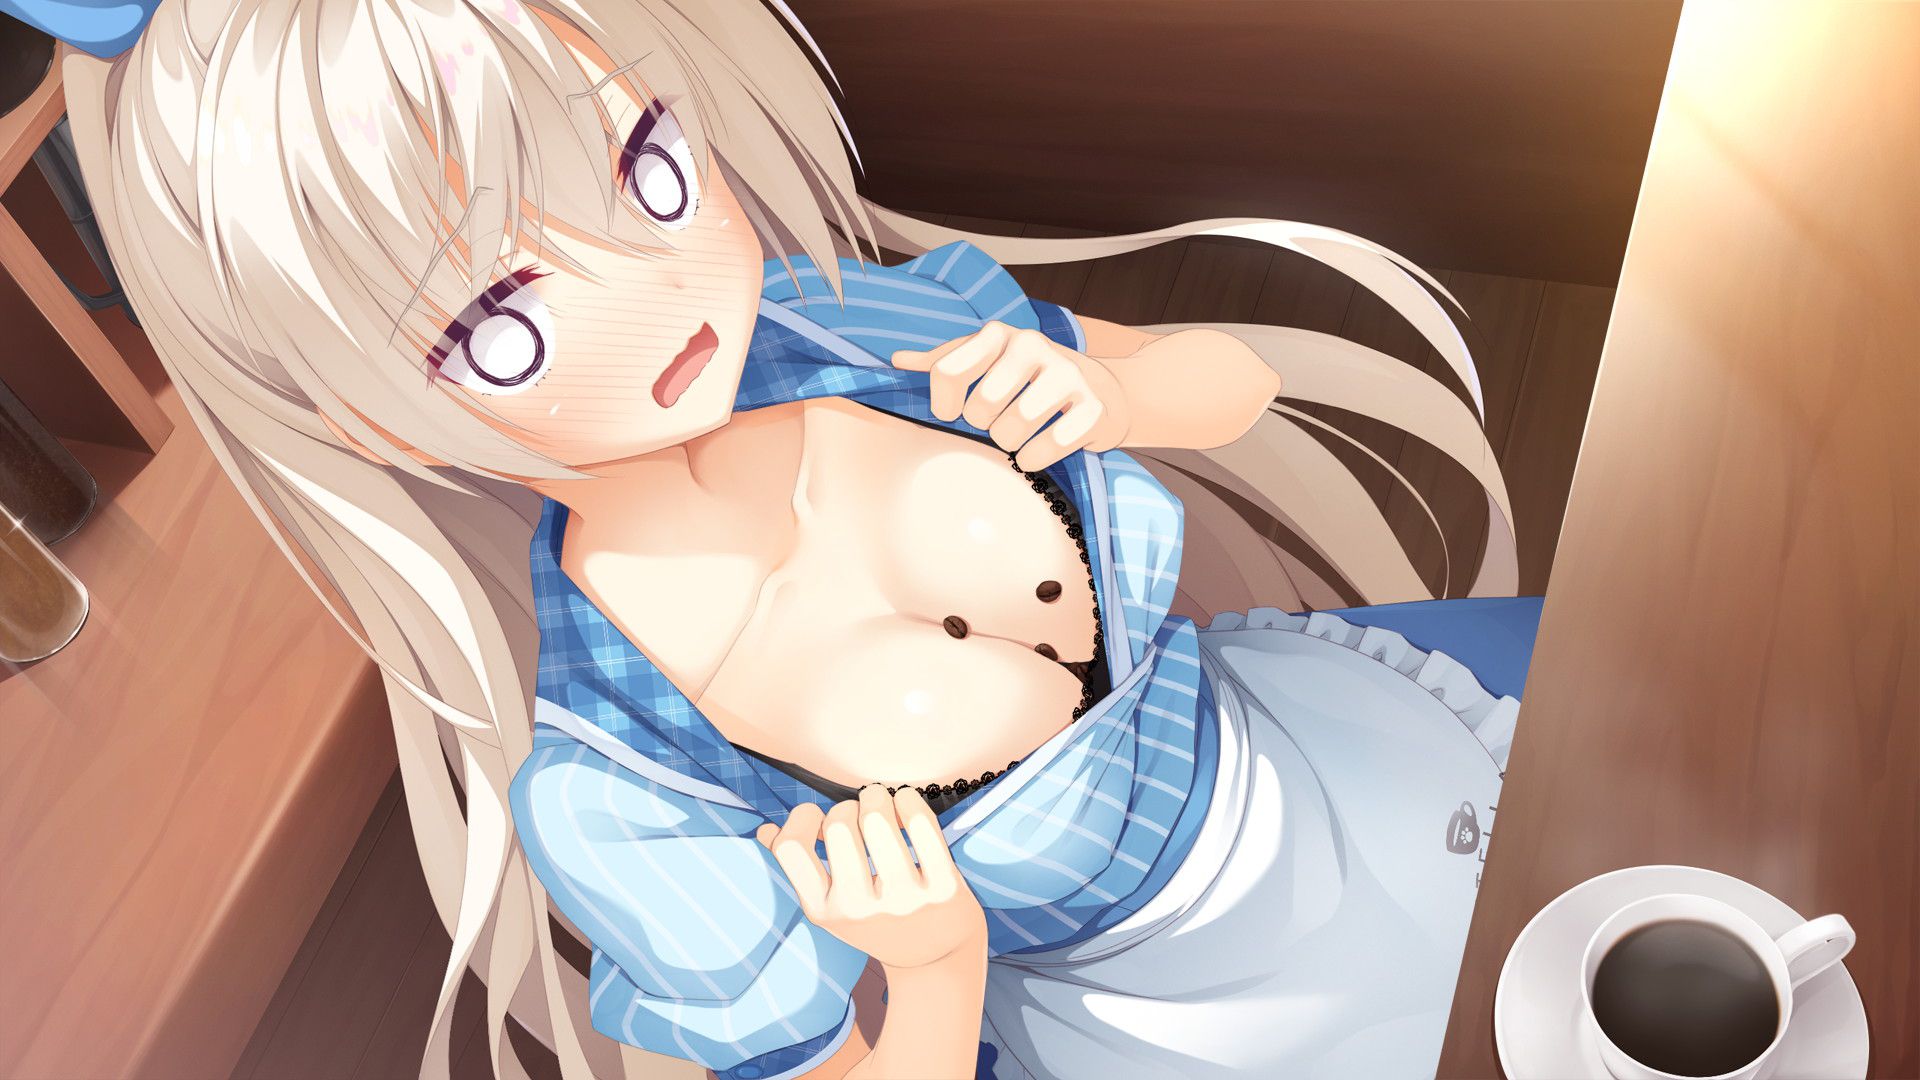 Isn't this the kind of Yamato girl we're looking for? Two-dimensional erotic image of a deep girl who is redding by doing naughty things called 11